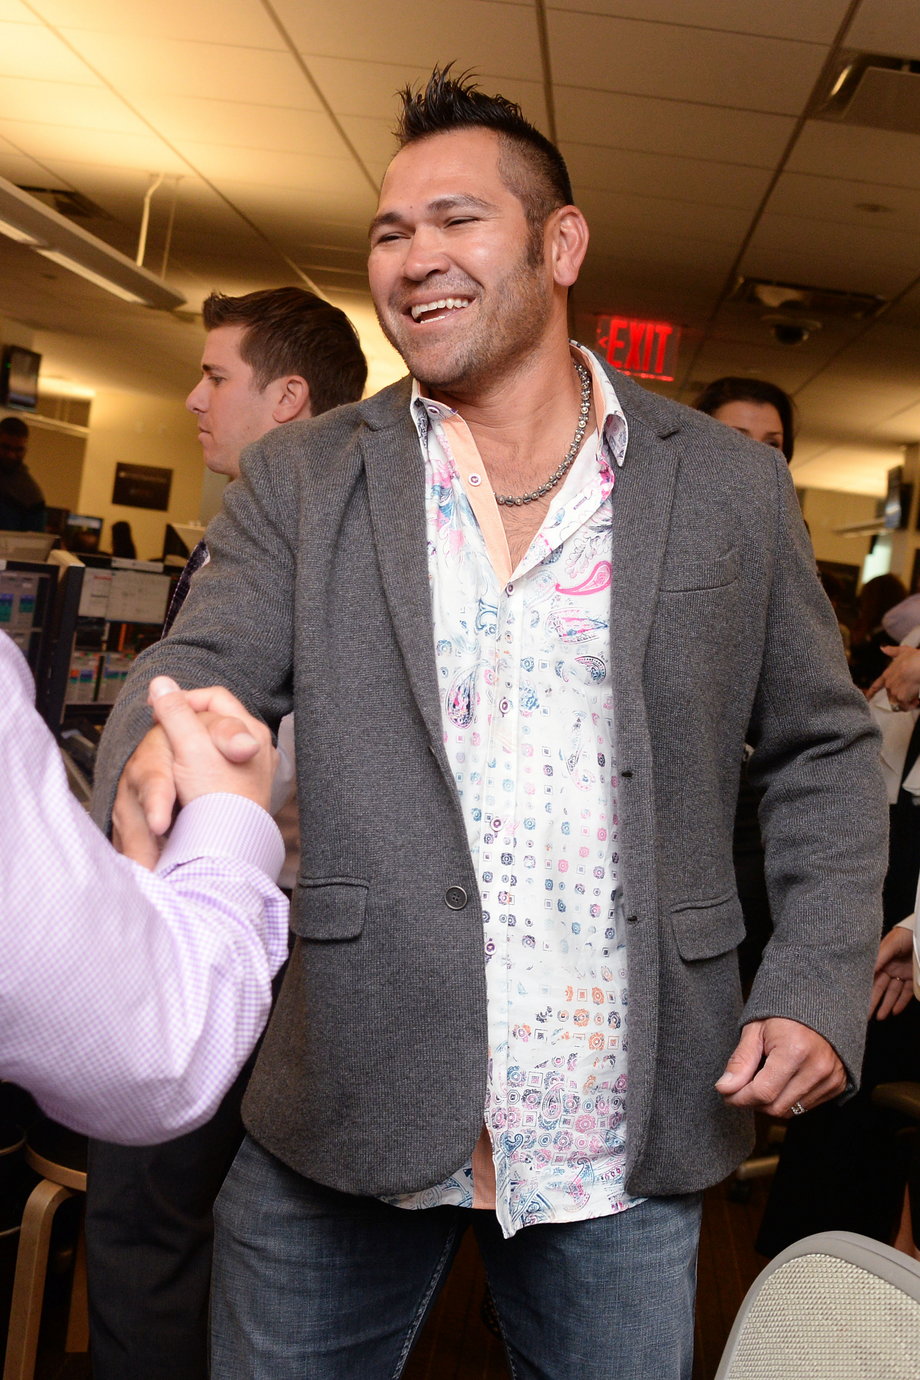 Baseball outfielder Johnny Damon dropped by.